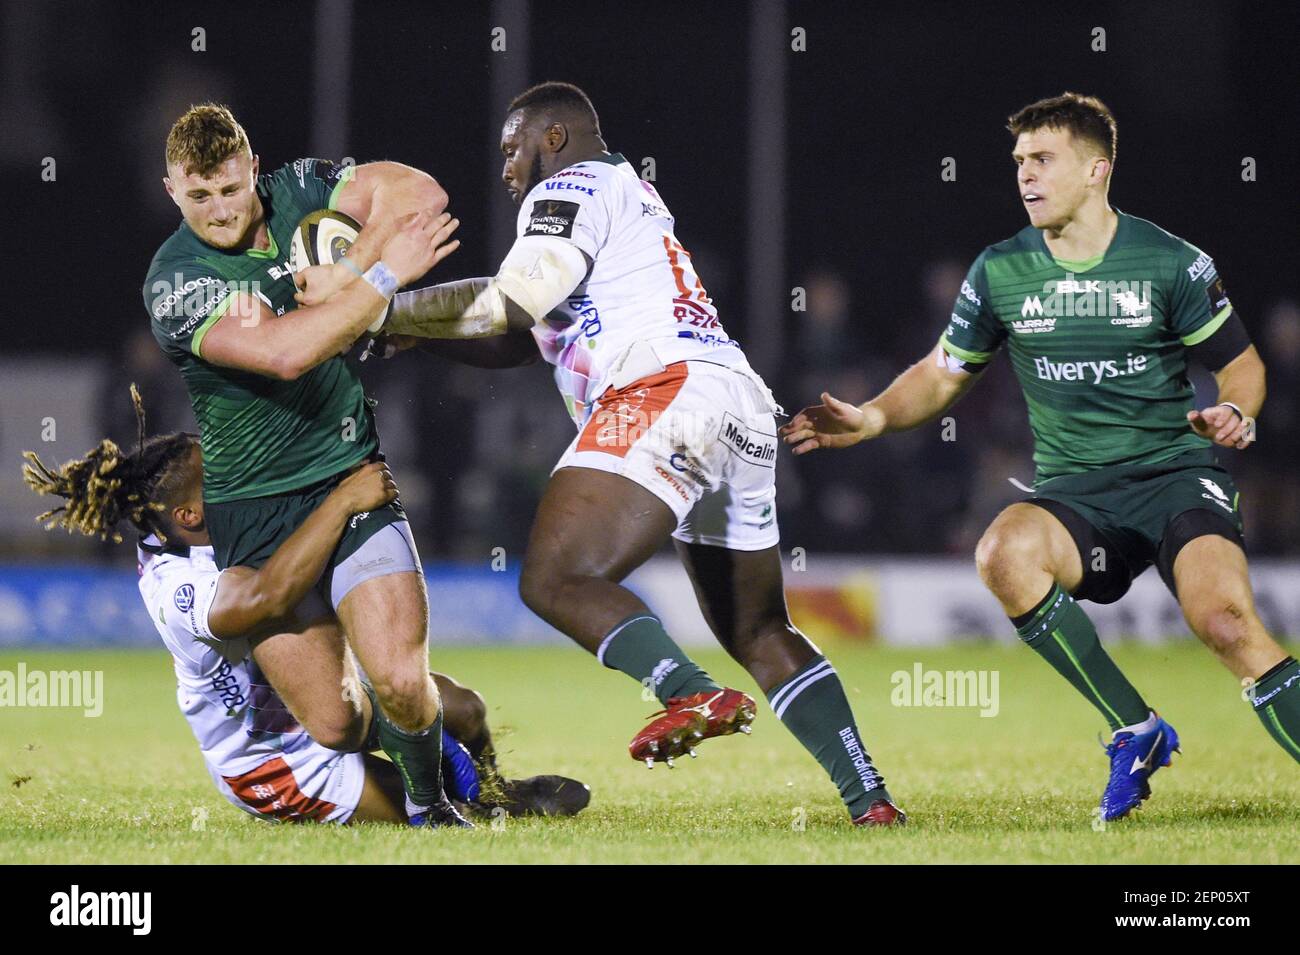 Peter Robb of Connacht tackled by Cherif Traore of Benetton during the  Guinness PRO14 match between Connacht Rugby and Benetton Rugby at the  Sportsground in Galway, Ireland on October 5, 2019 (Photo